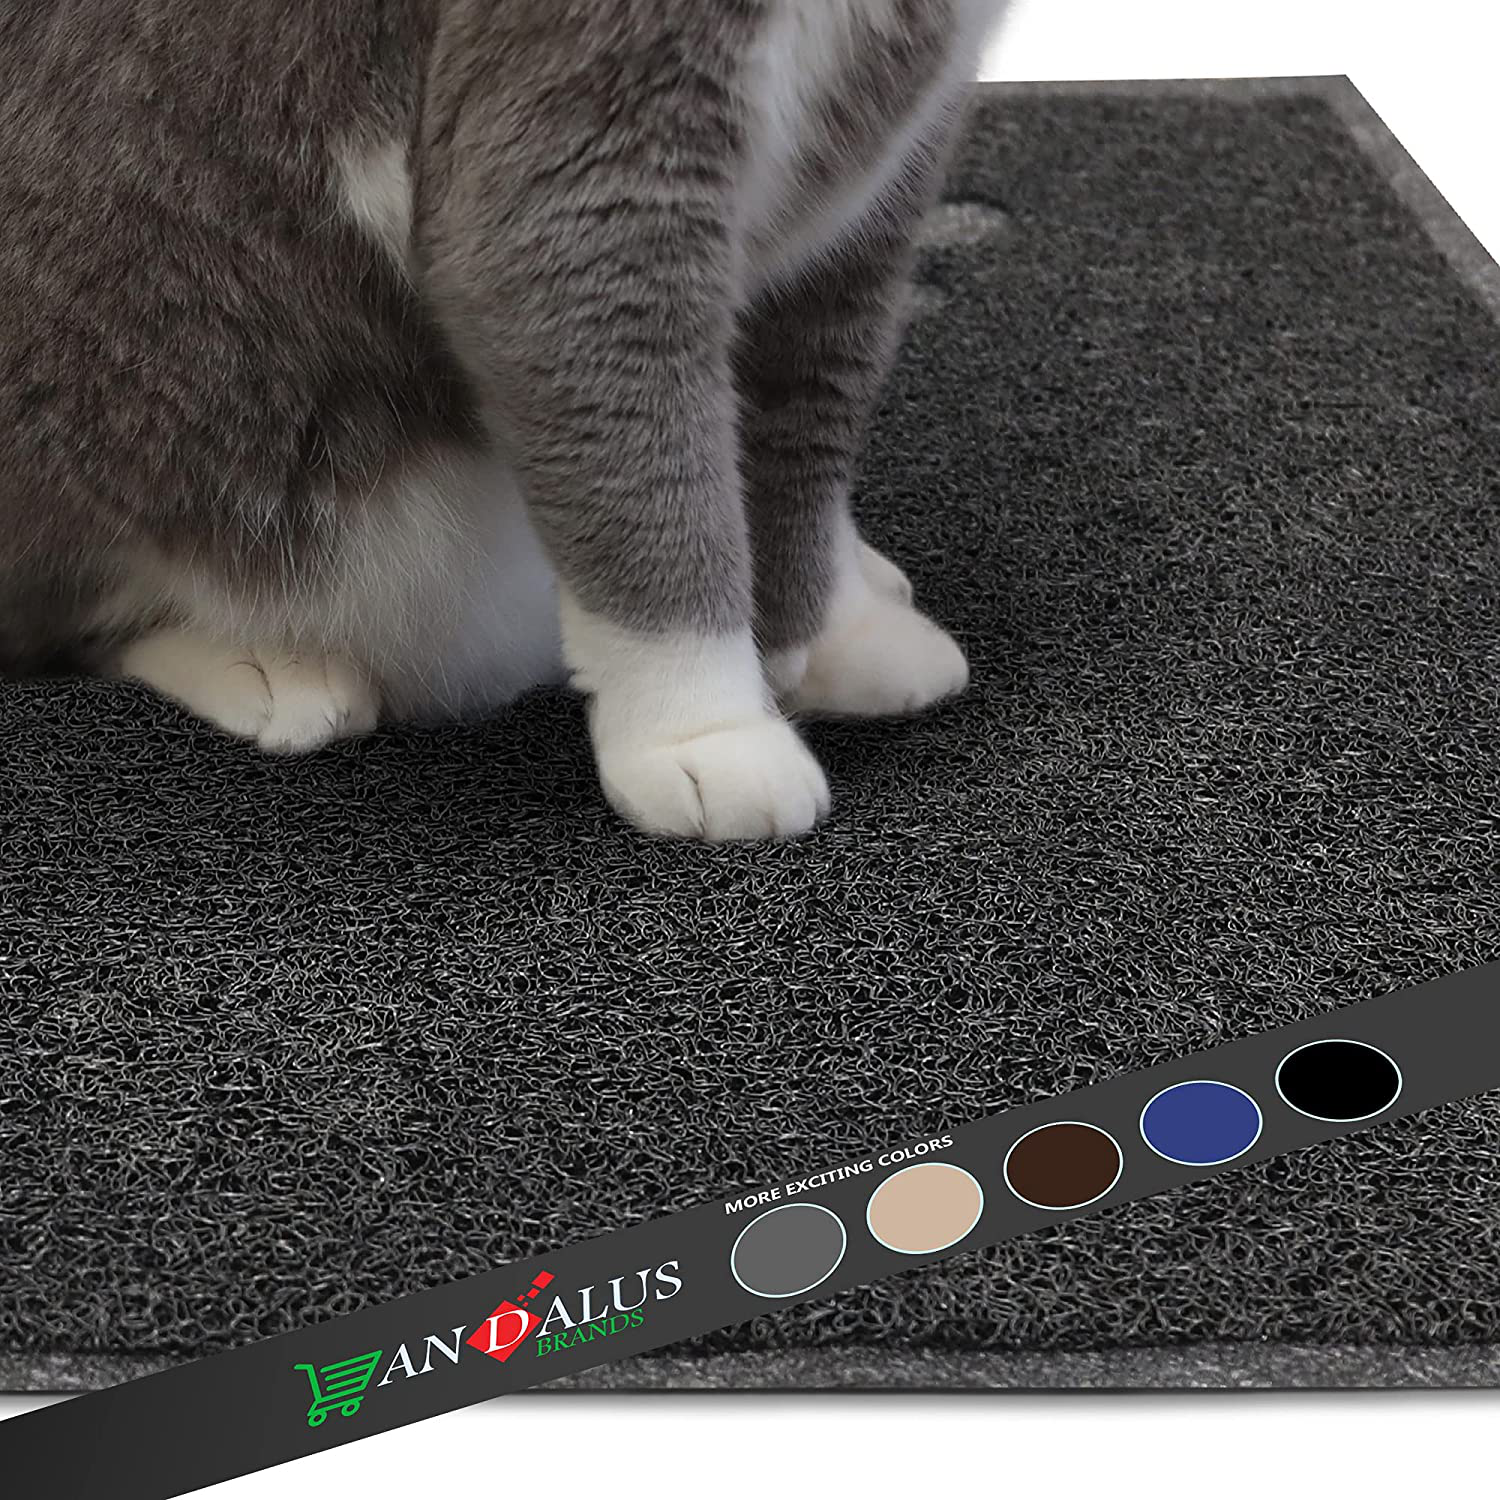  Andalus Extra Large Cat Litter Mat, Pack of 1